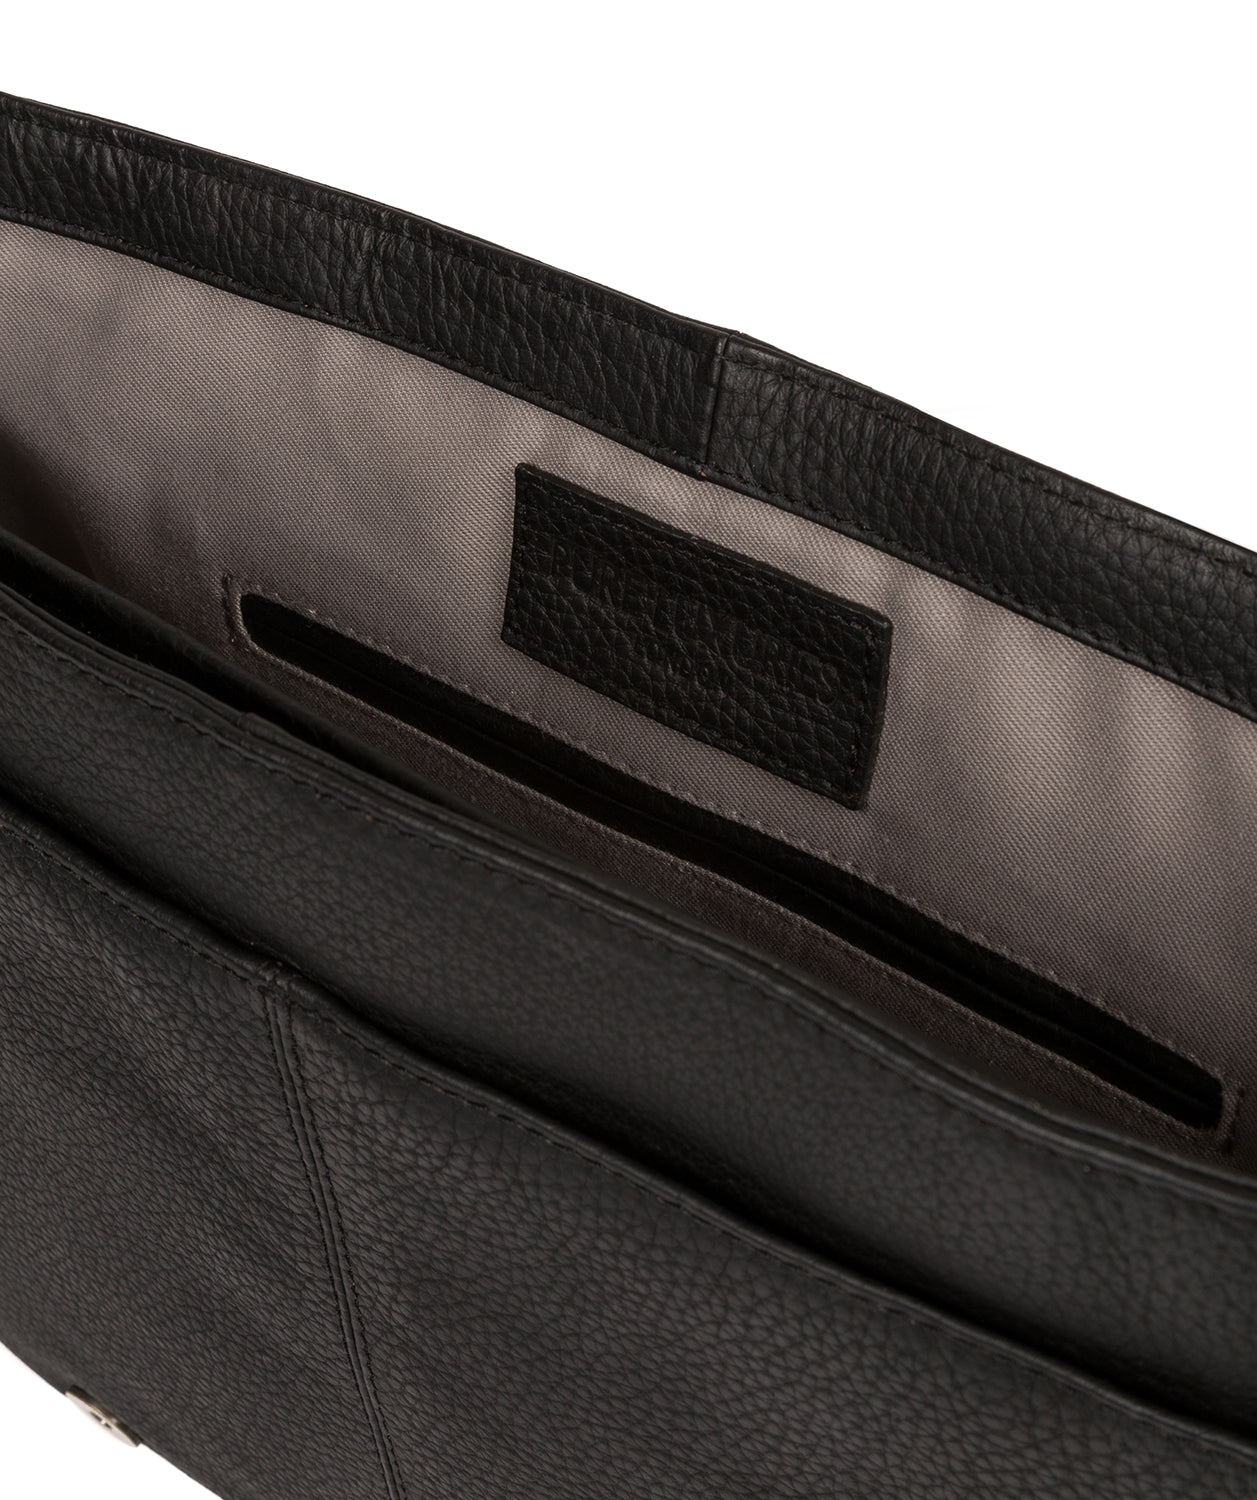 Black Leather Messenger Bag 'Lawrence' by Pure Luxuries – Pure Luxuries ...